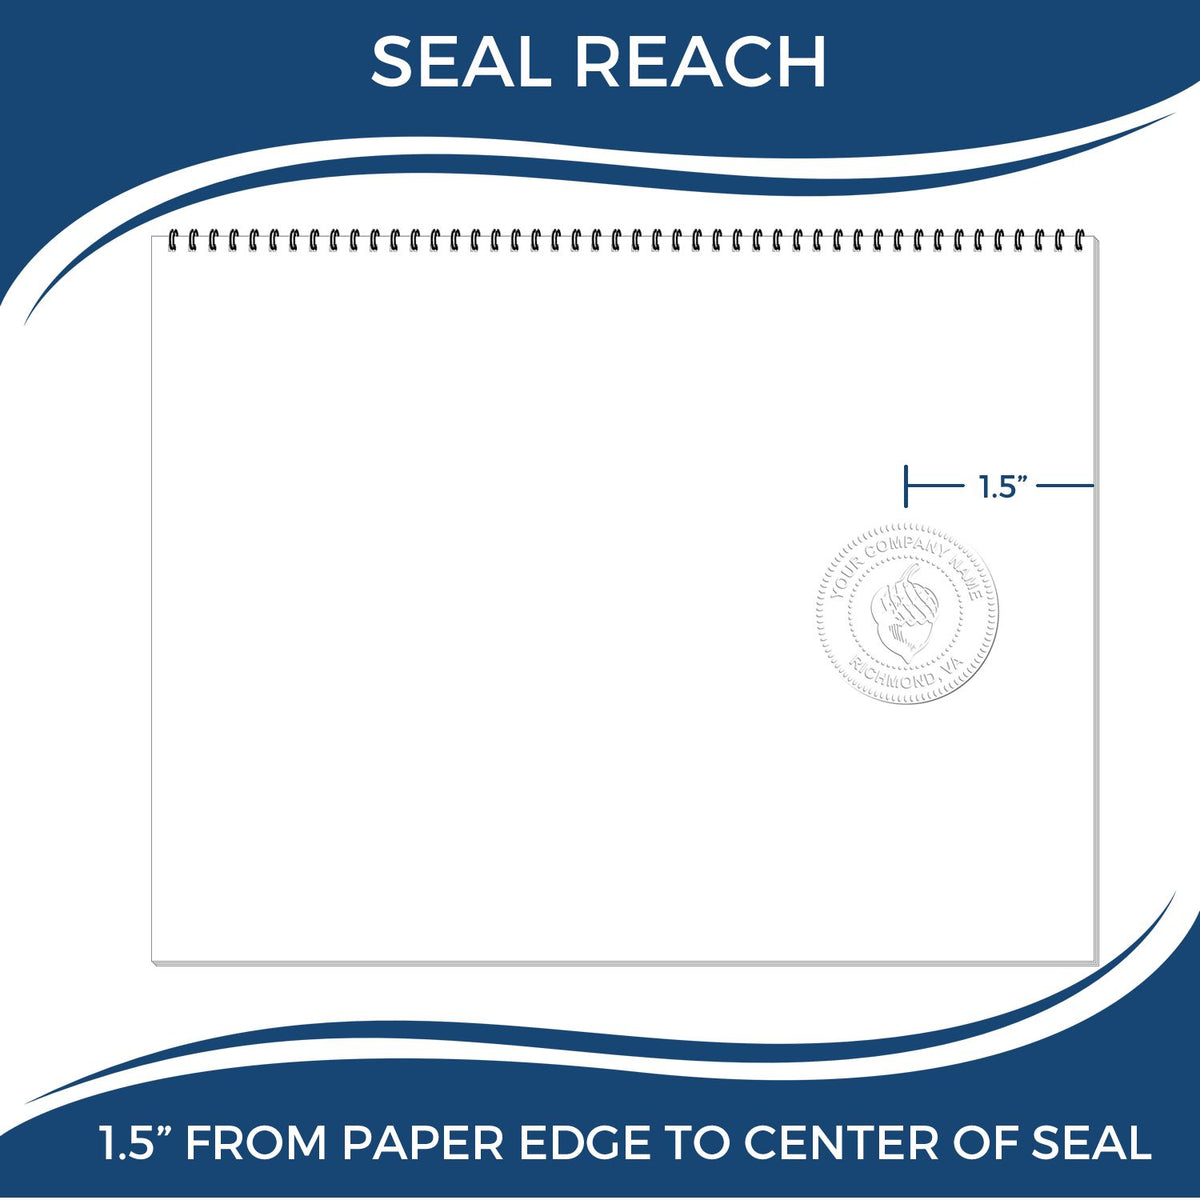 An infographic showing the seal reach which is represented by a ruler and a miniature seal image of the Soft Pocket Arizona Landscape Architect Embosser